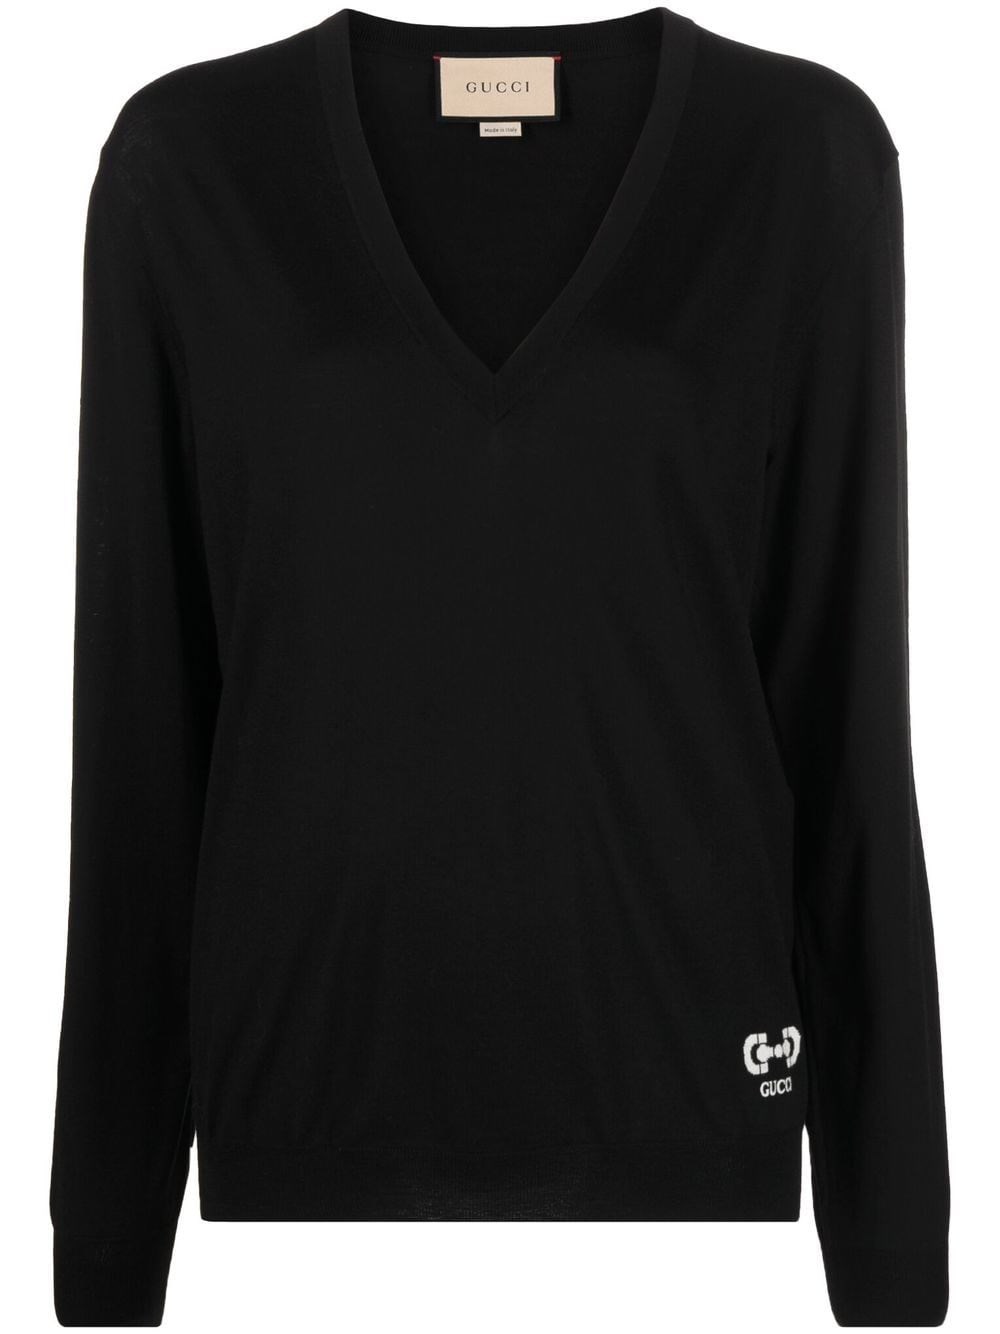 GUCCI LONG SLEEVE V-NECK TOP